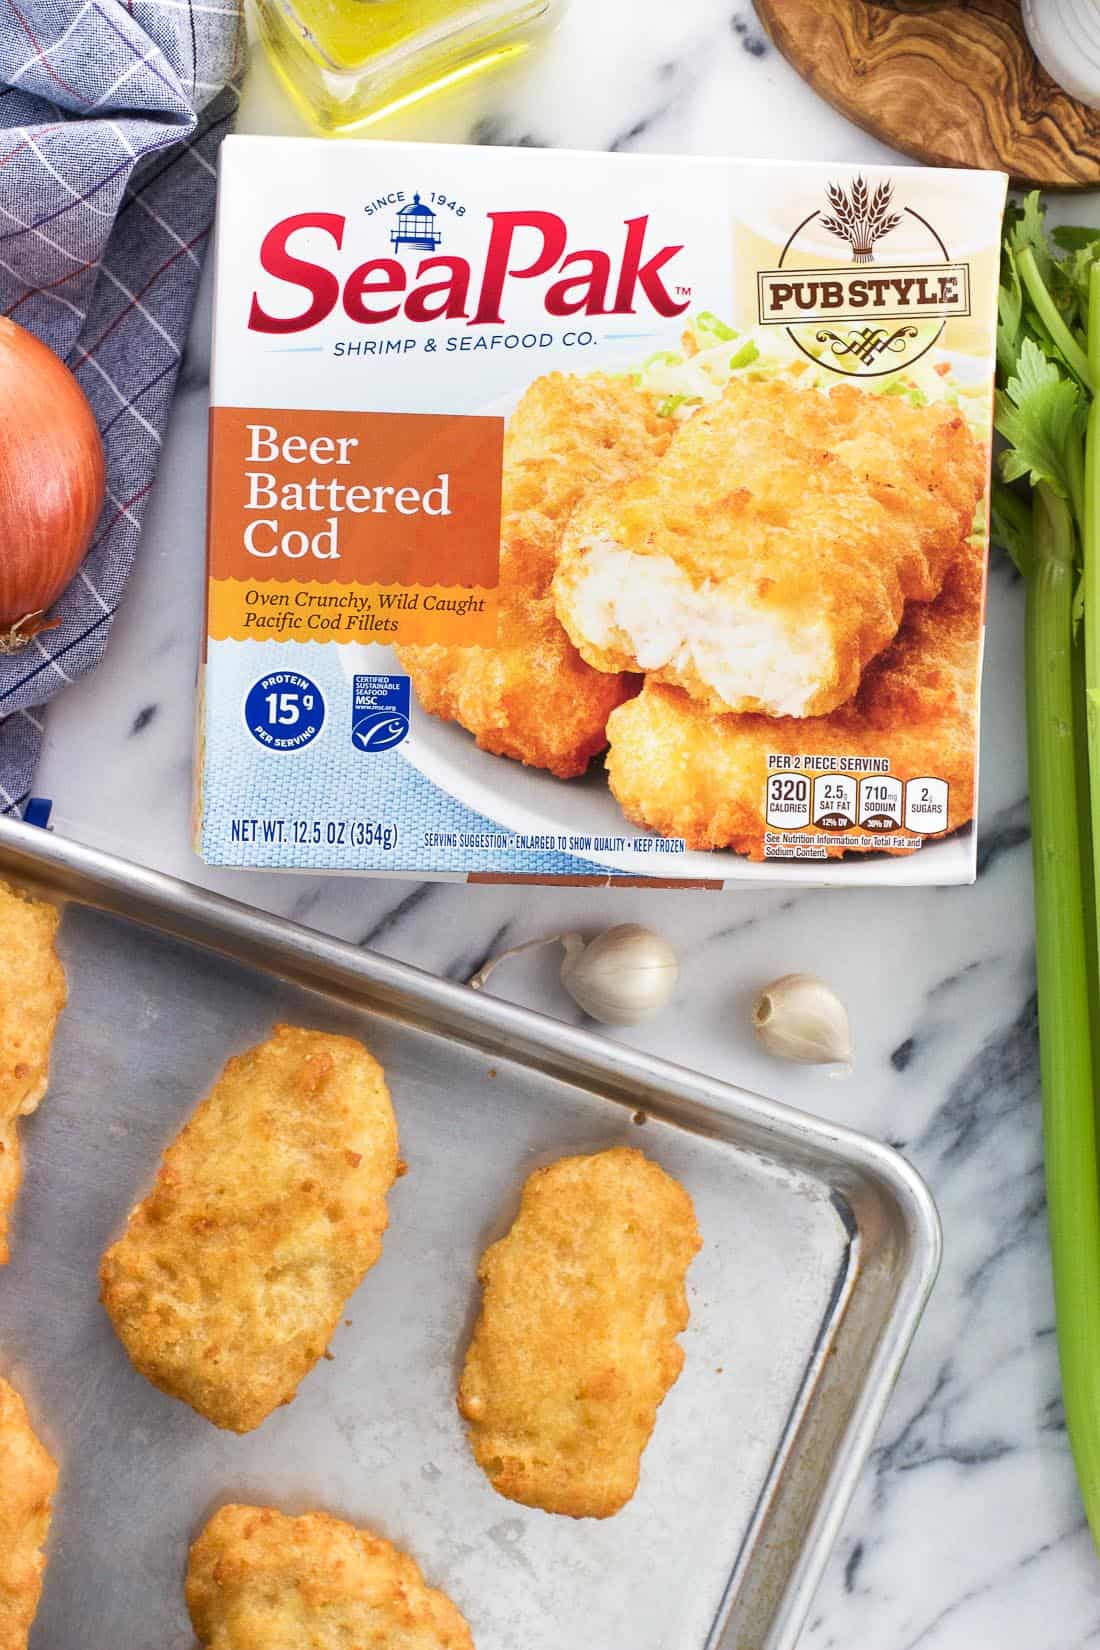 A package of SeaPak beer battered cod next to a tray of cooked cod fillets